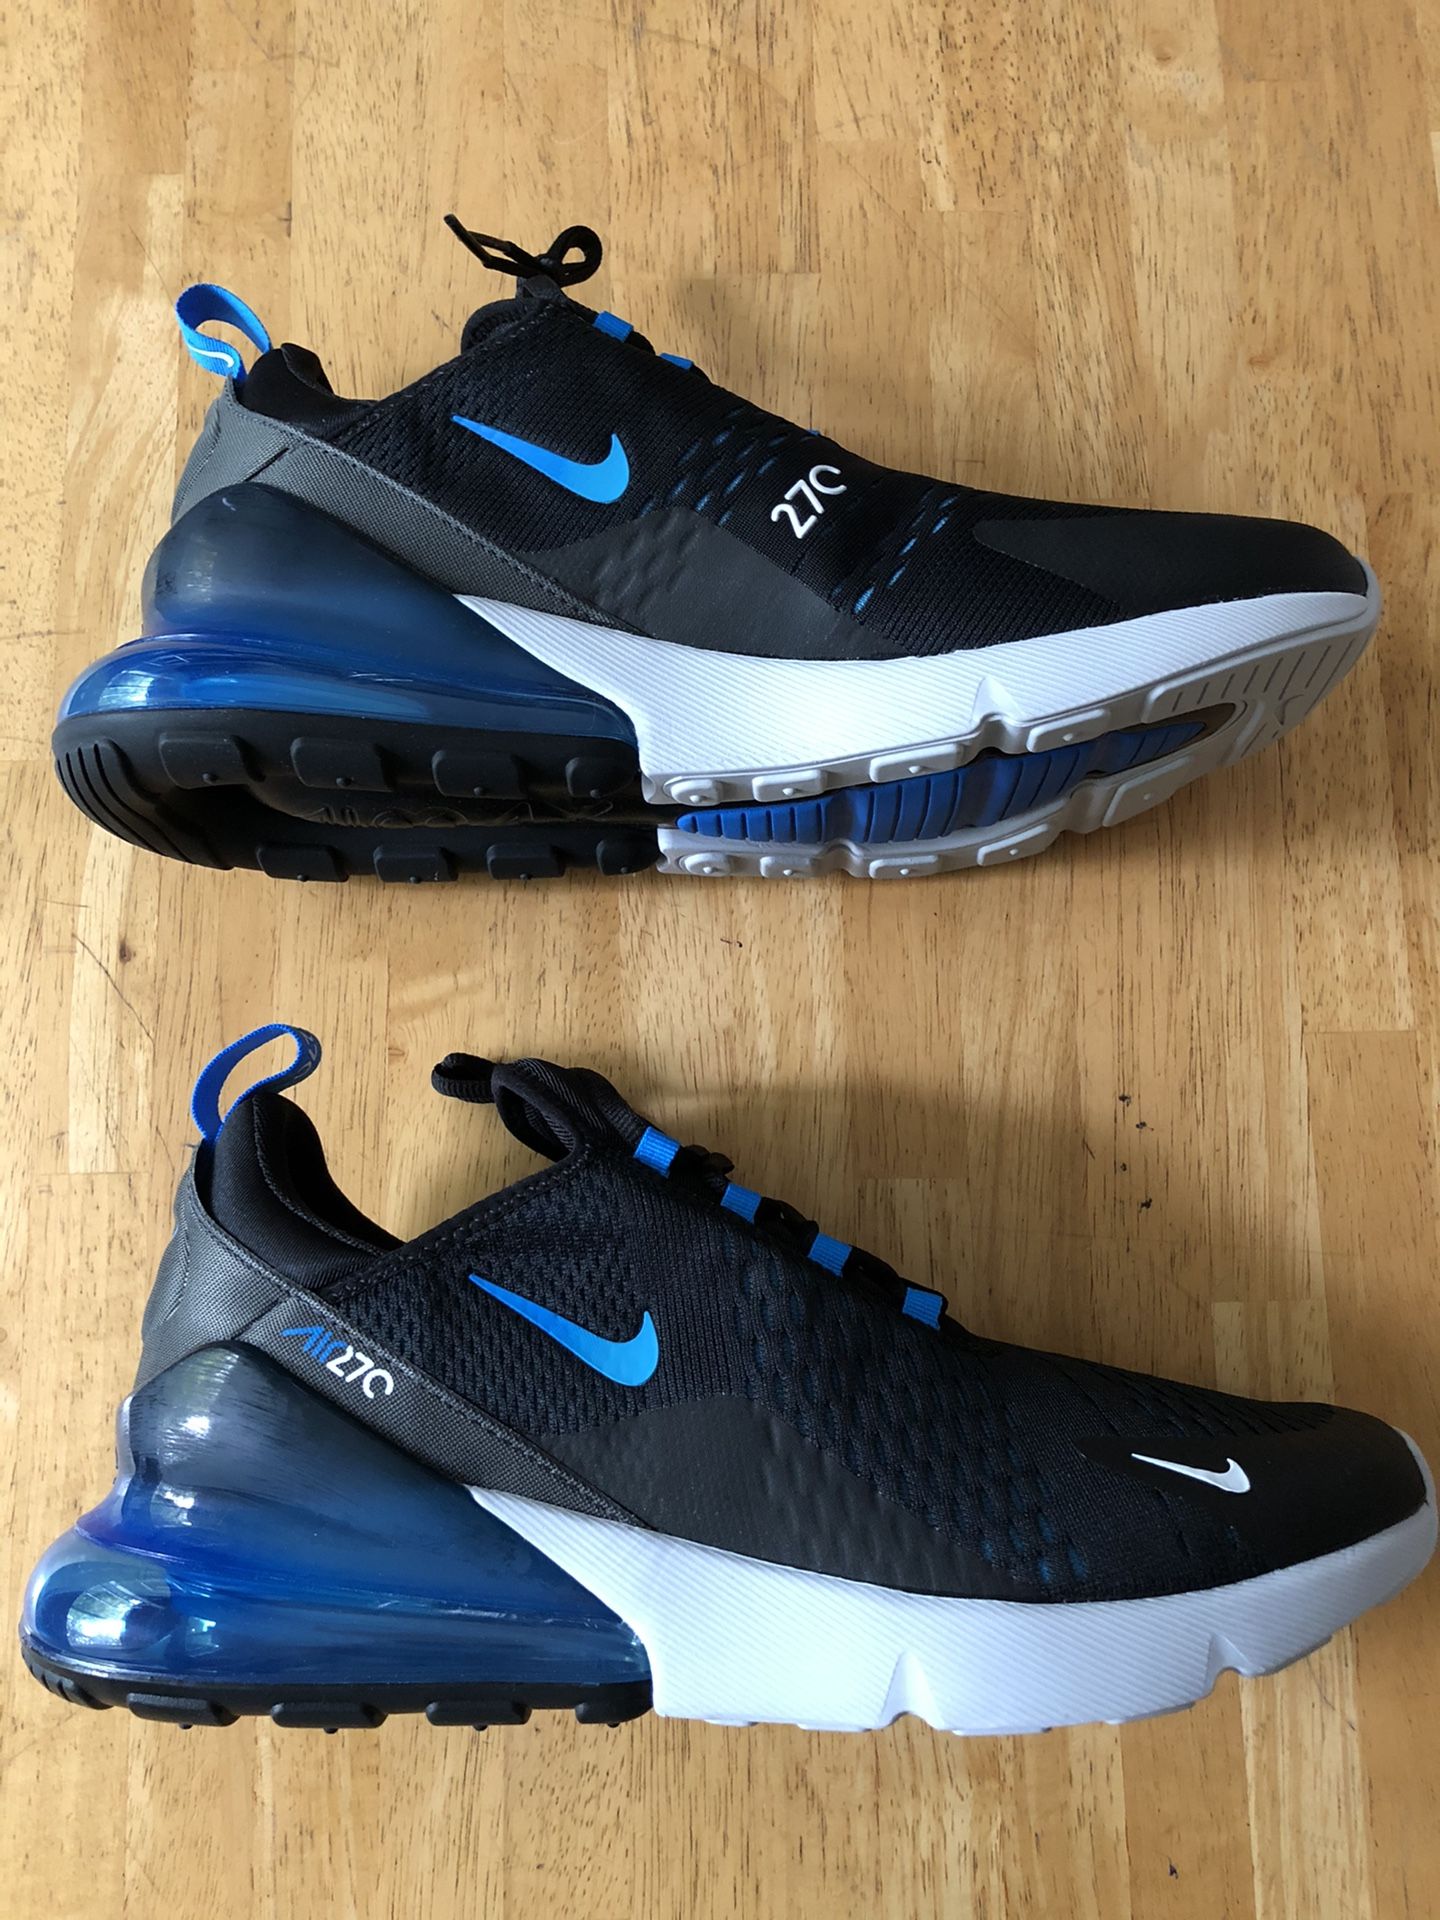 Brand new Nike air max 270 blue fury running shoes men’s size 12